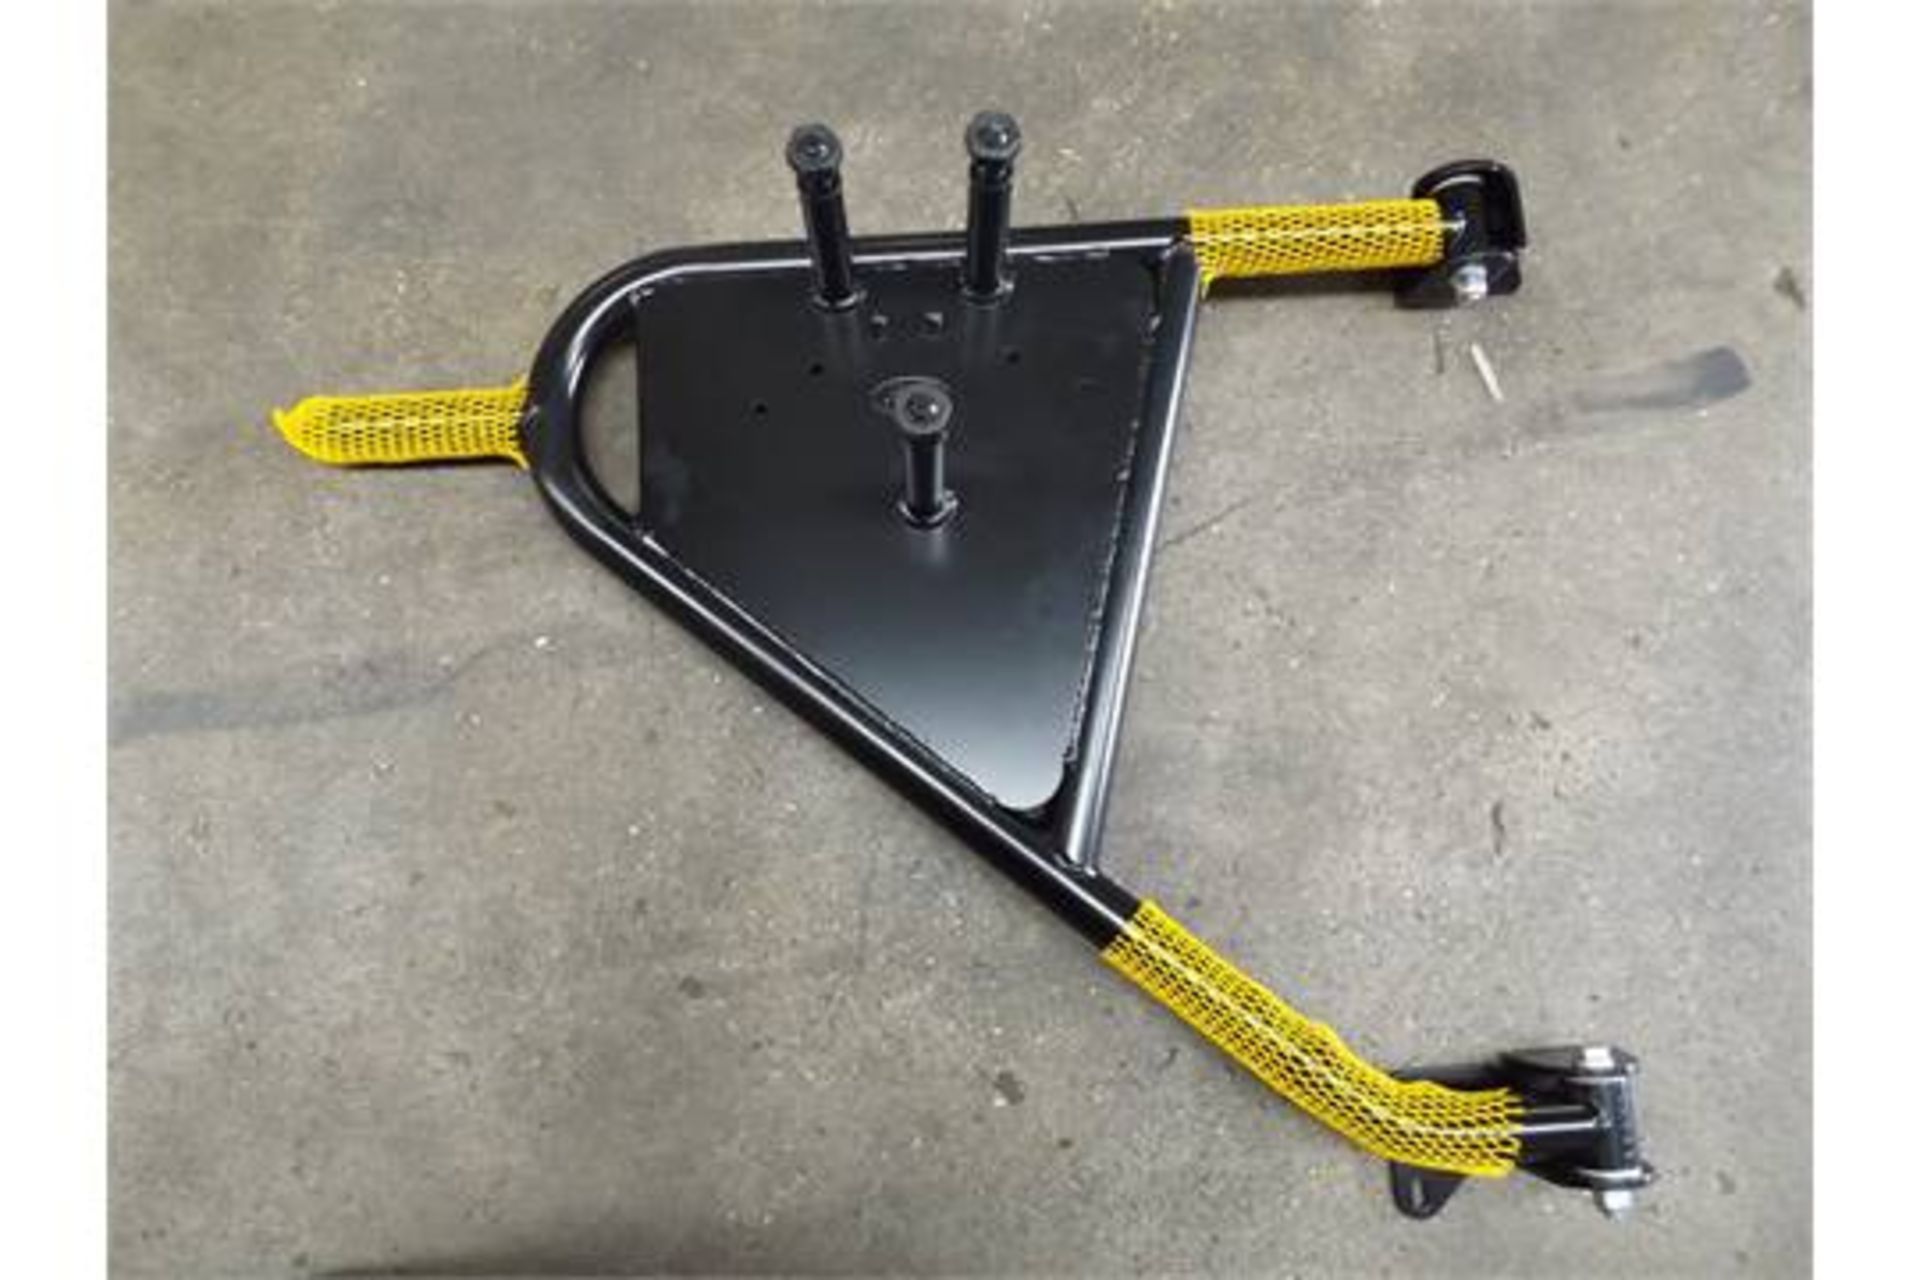 12 x Land Rover Defender Swing Out Spare Wheel Carrier Kits P/No VPLDR0129 - Image 3 of 11